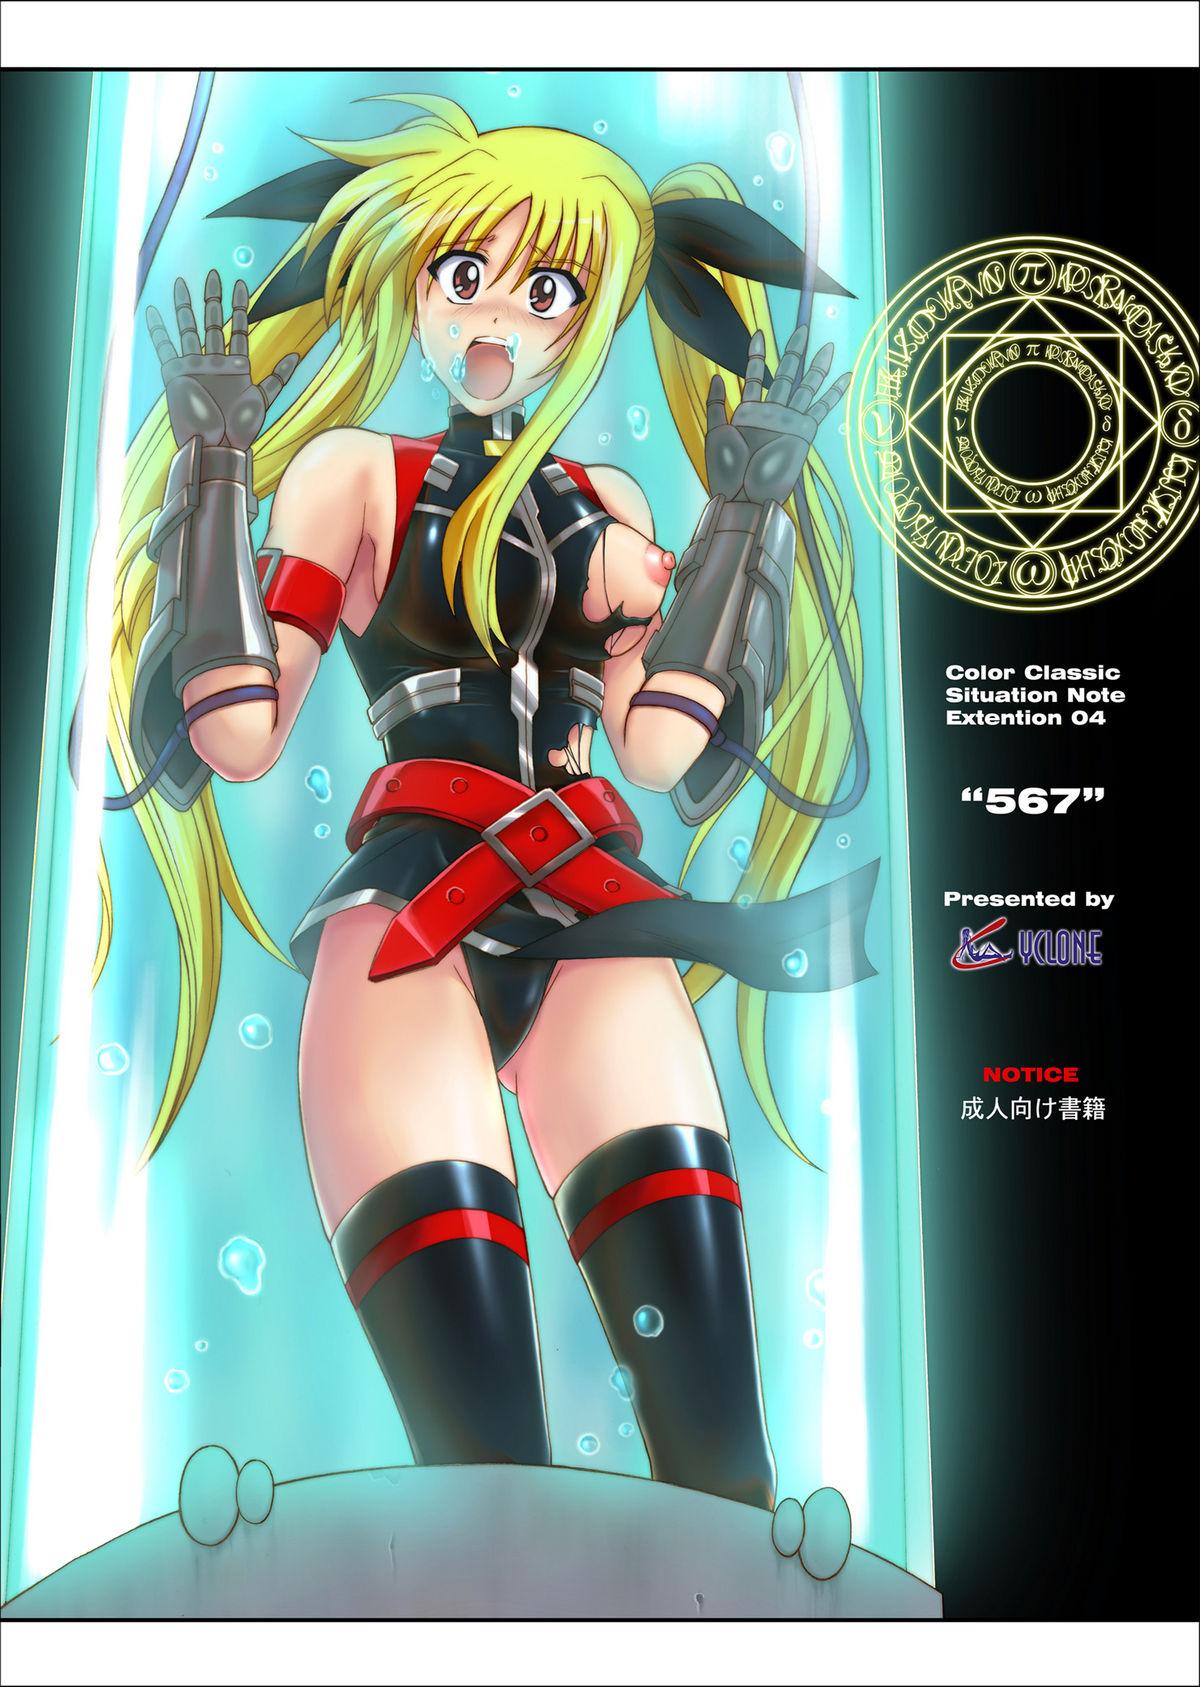 Grosso Color Classic Note Extension 04 "567" - Mahou shoujo lyrical nanoha Erotic - Page 1